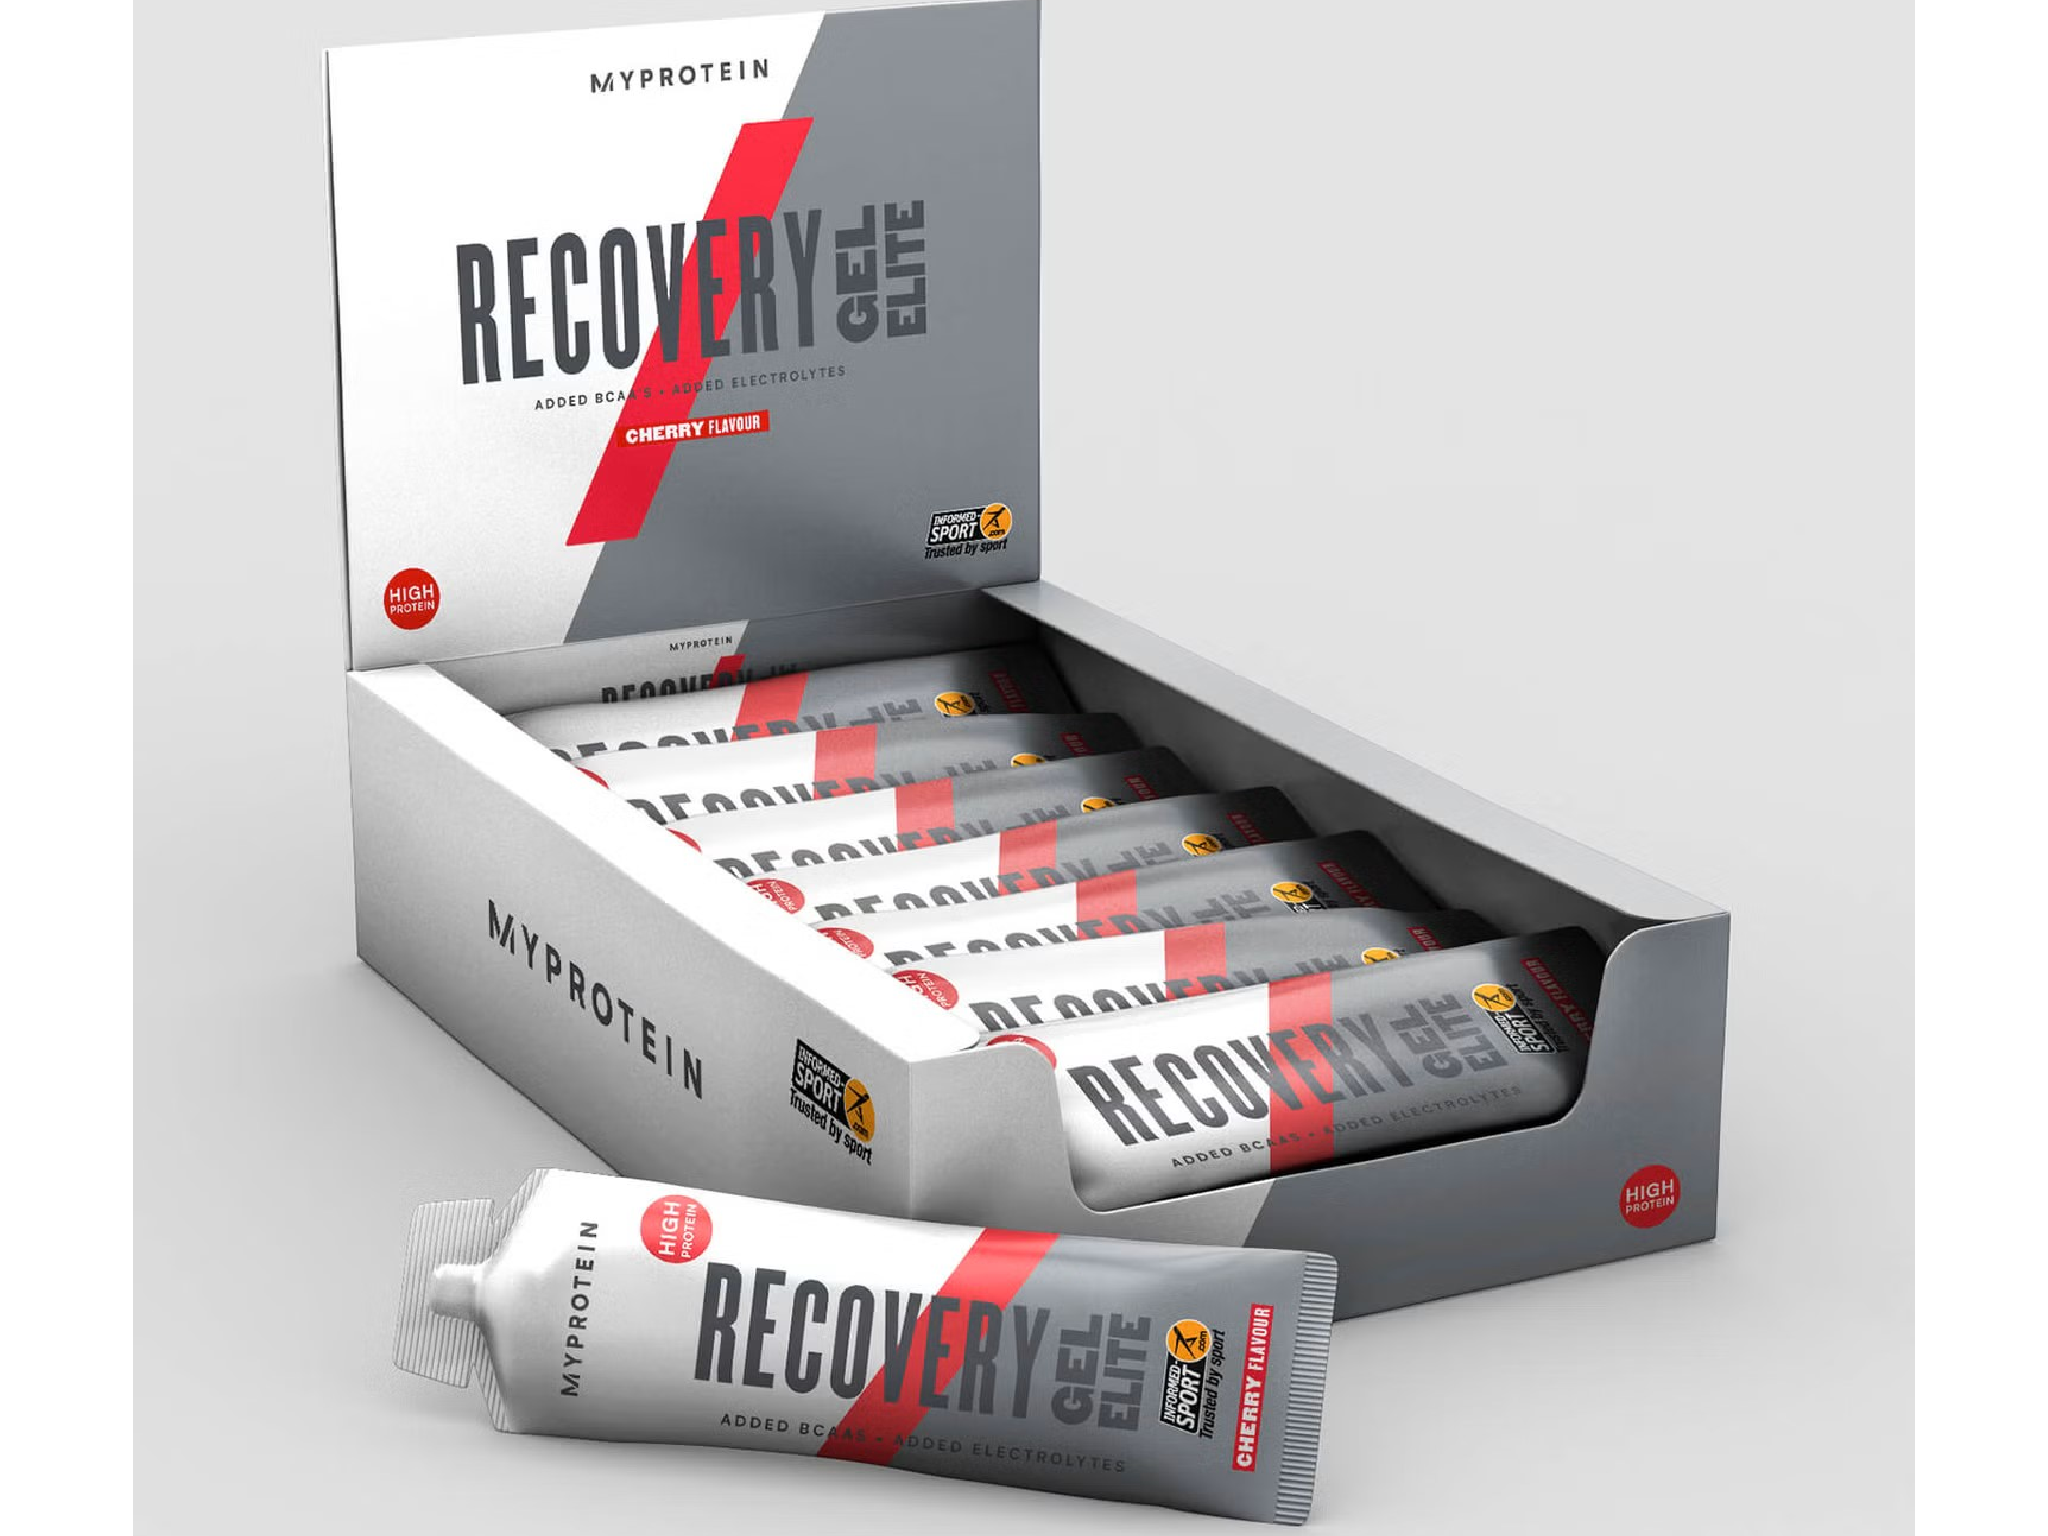 Each box contains 20 individually-portioned recovery gels